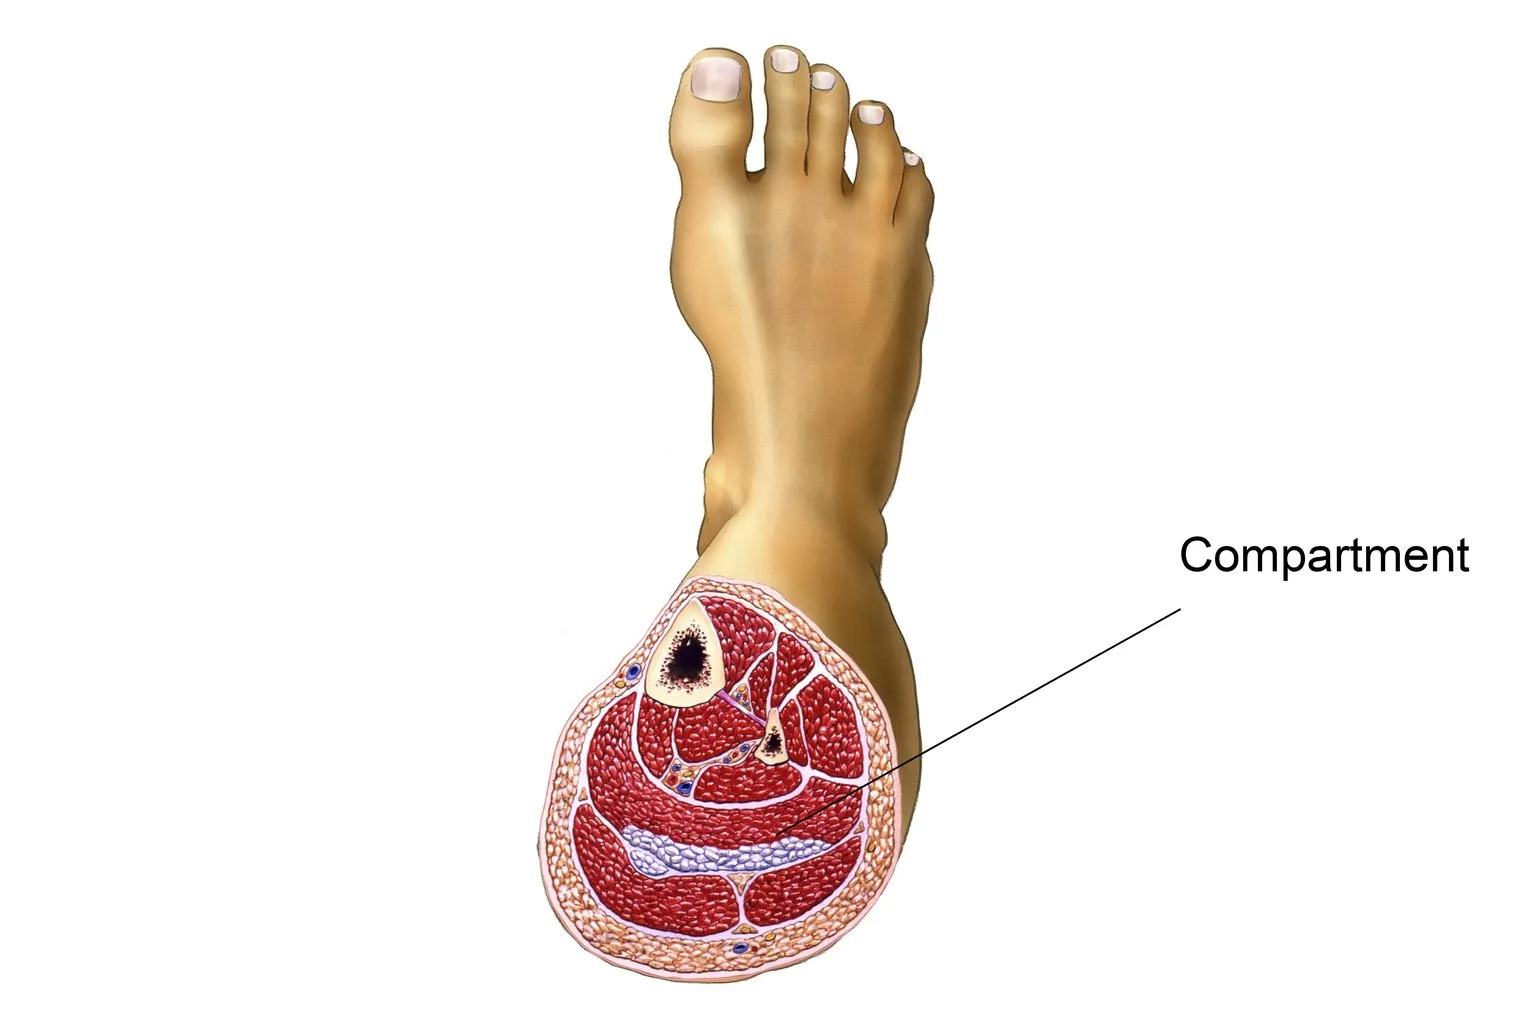 chronic exertional compartment syndrome